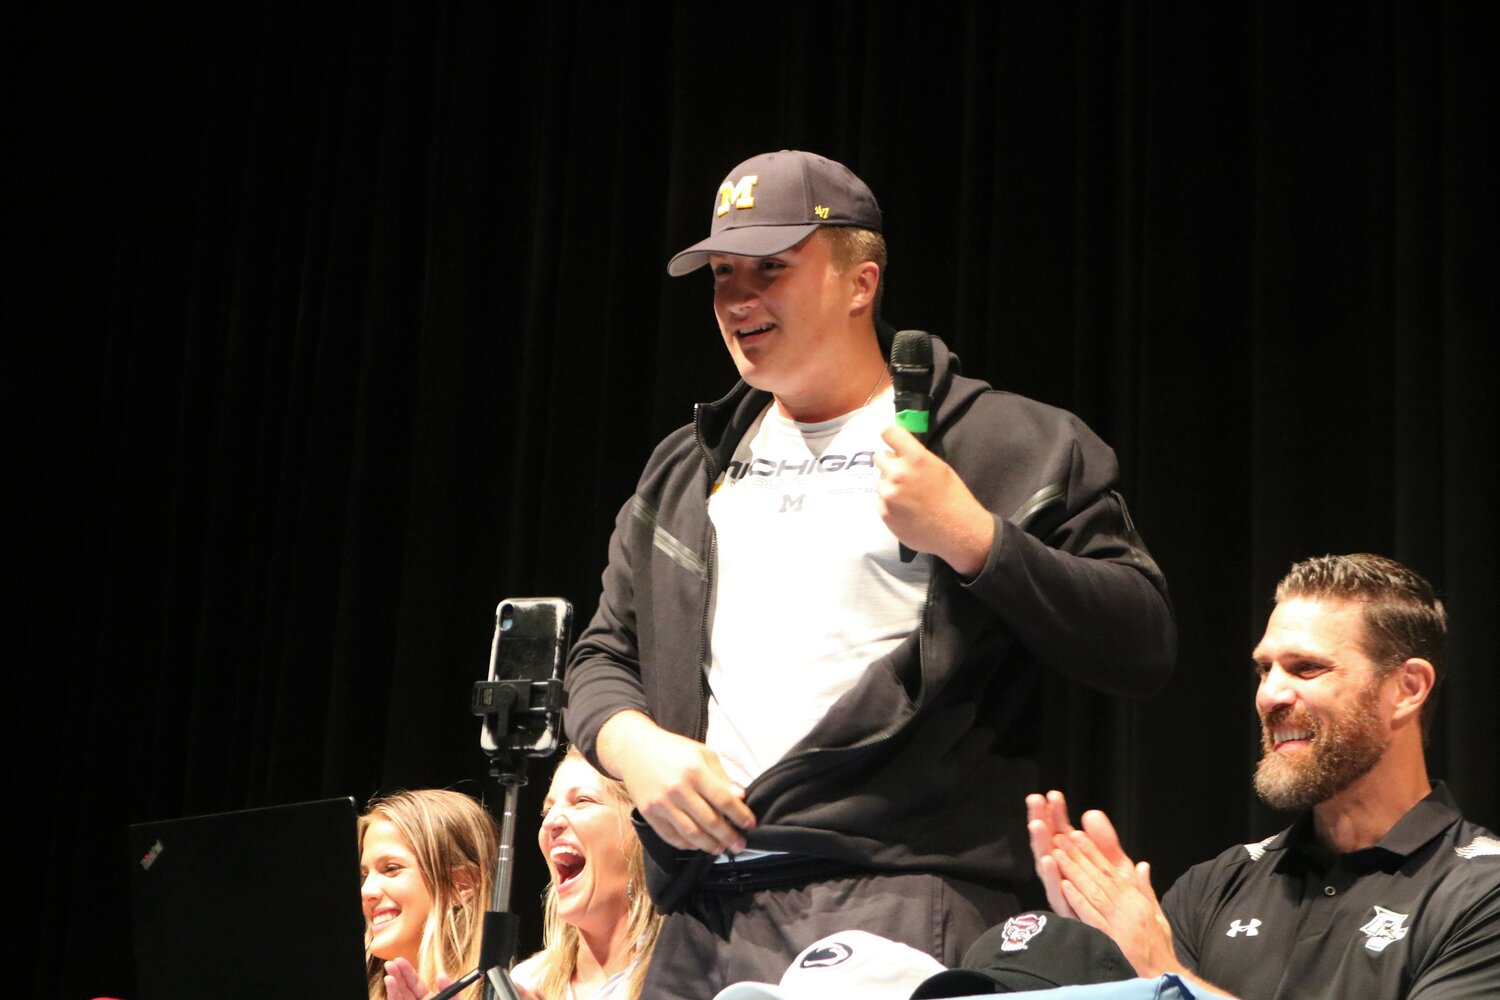 Ponte Vedra High junior offensive lineman Jake Guarnera commits to play football at the University of Michigan during an announcement ceremony in the school’s auditorium April 28.